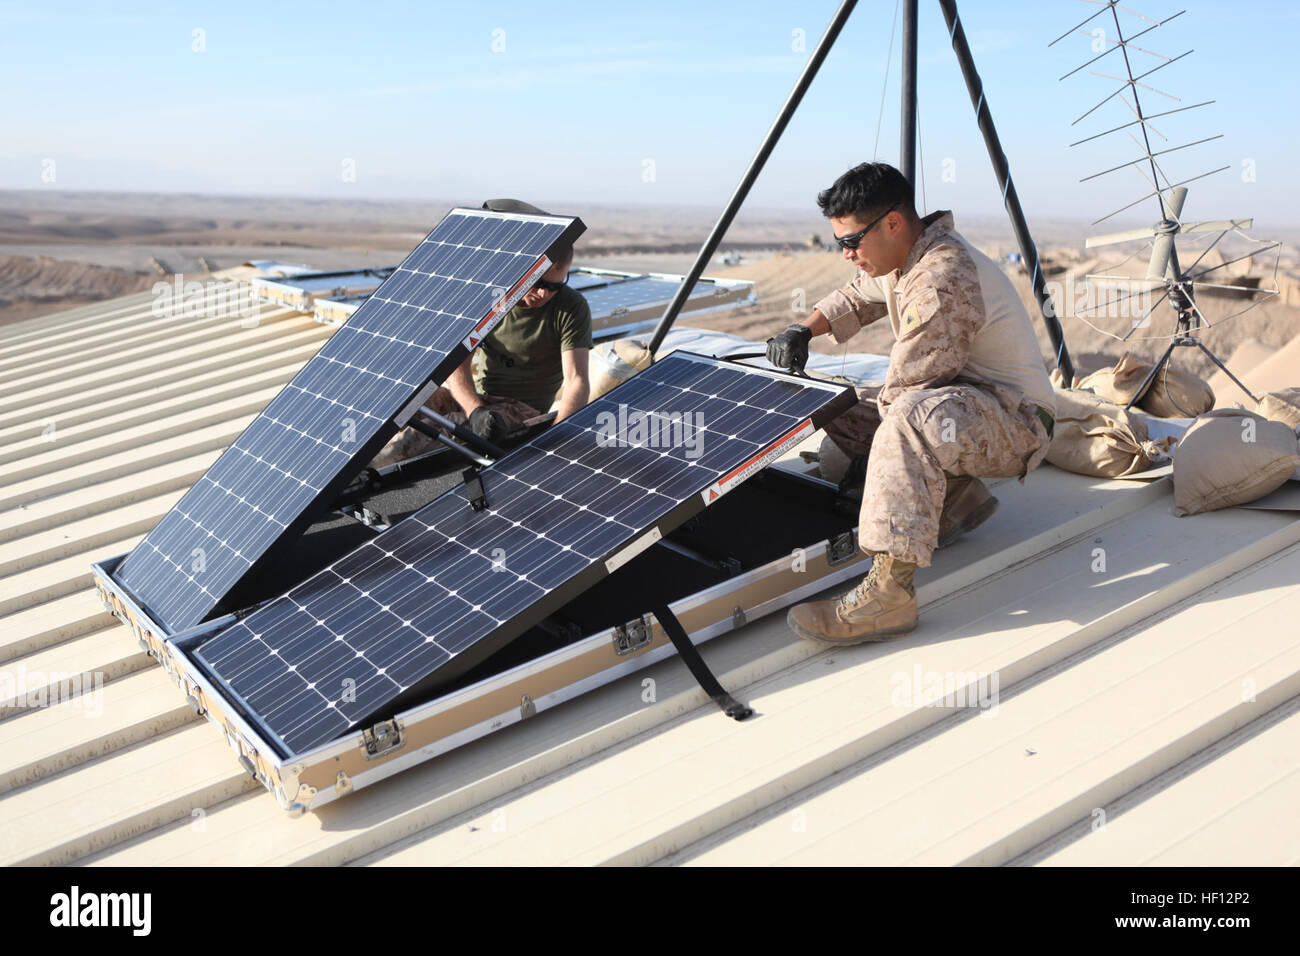 U.S. Marine Corps Cpl. Robert G. Sutton, left, and Cpl. Moses E. Perez, field wireman with Combat Logistics Regiment 15 install new solar panels on Combat Outpost Shukvani, Helmand province, Afghanistan, Nov. 19, 2012. Sutton and Perez installed the solar panels to provide power to radios, laptops, and computers in the event of power outages.(U.S. Marine Corps photo by Lance Cpl. Alexander Quiles/Released) Solar Panel installment 121119-M-SF473-010 Stock Photo